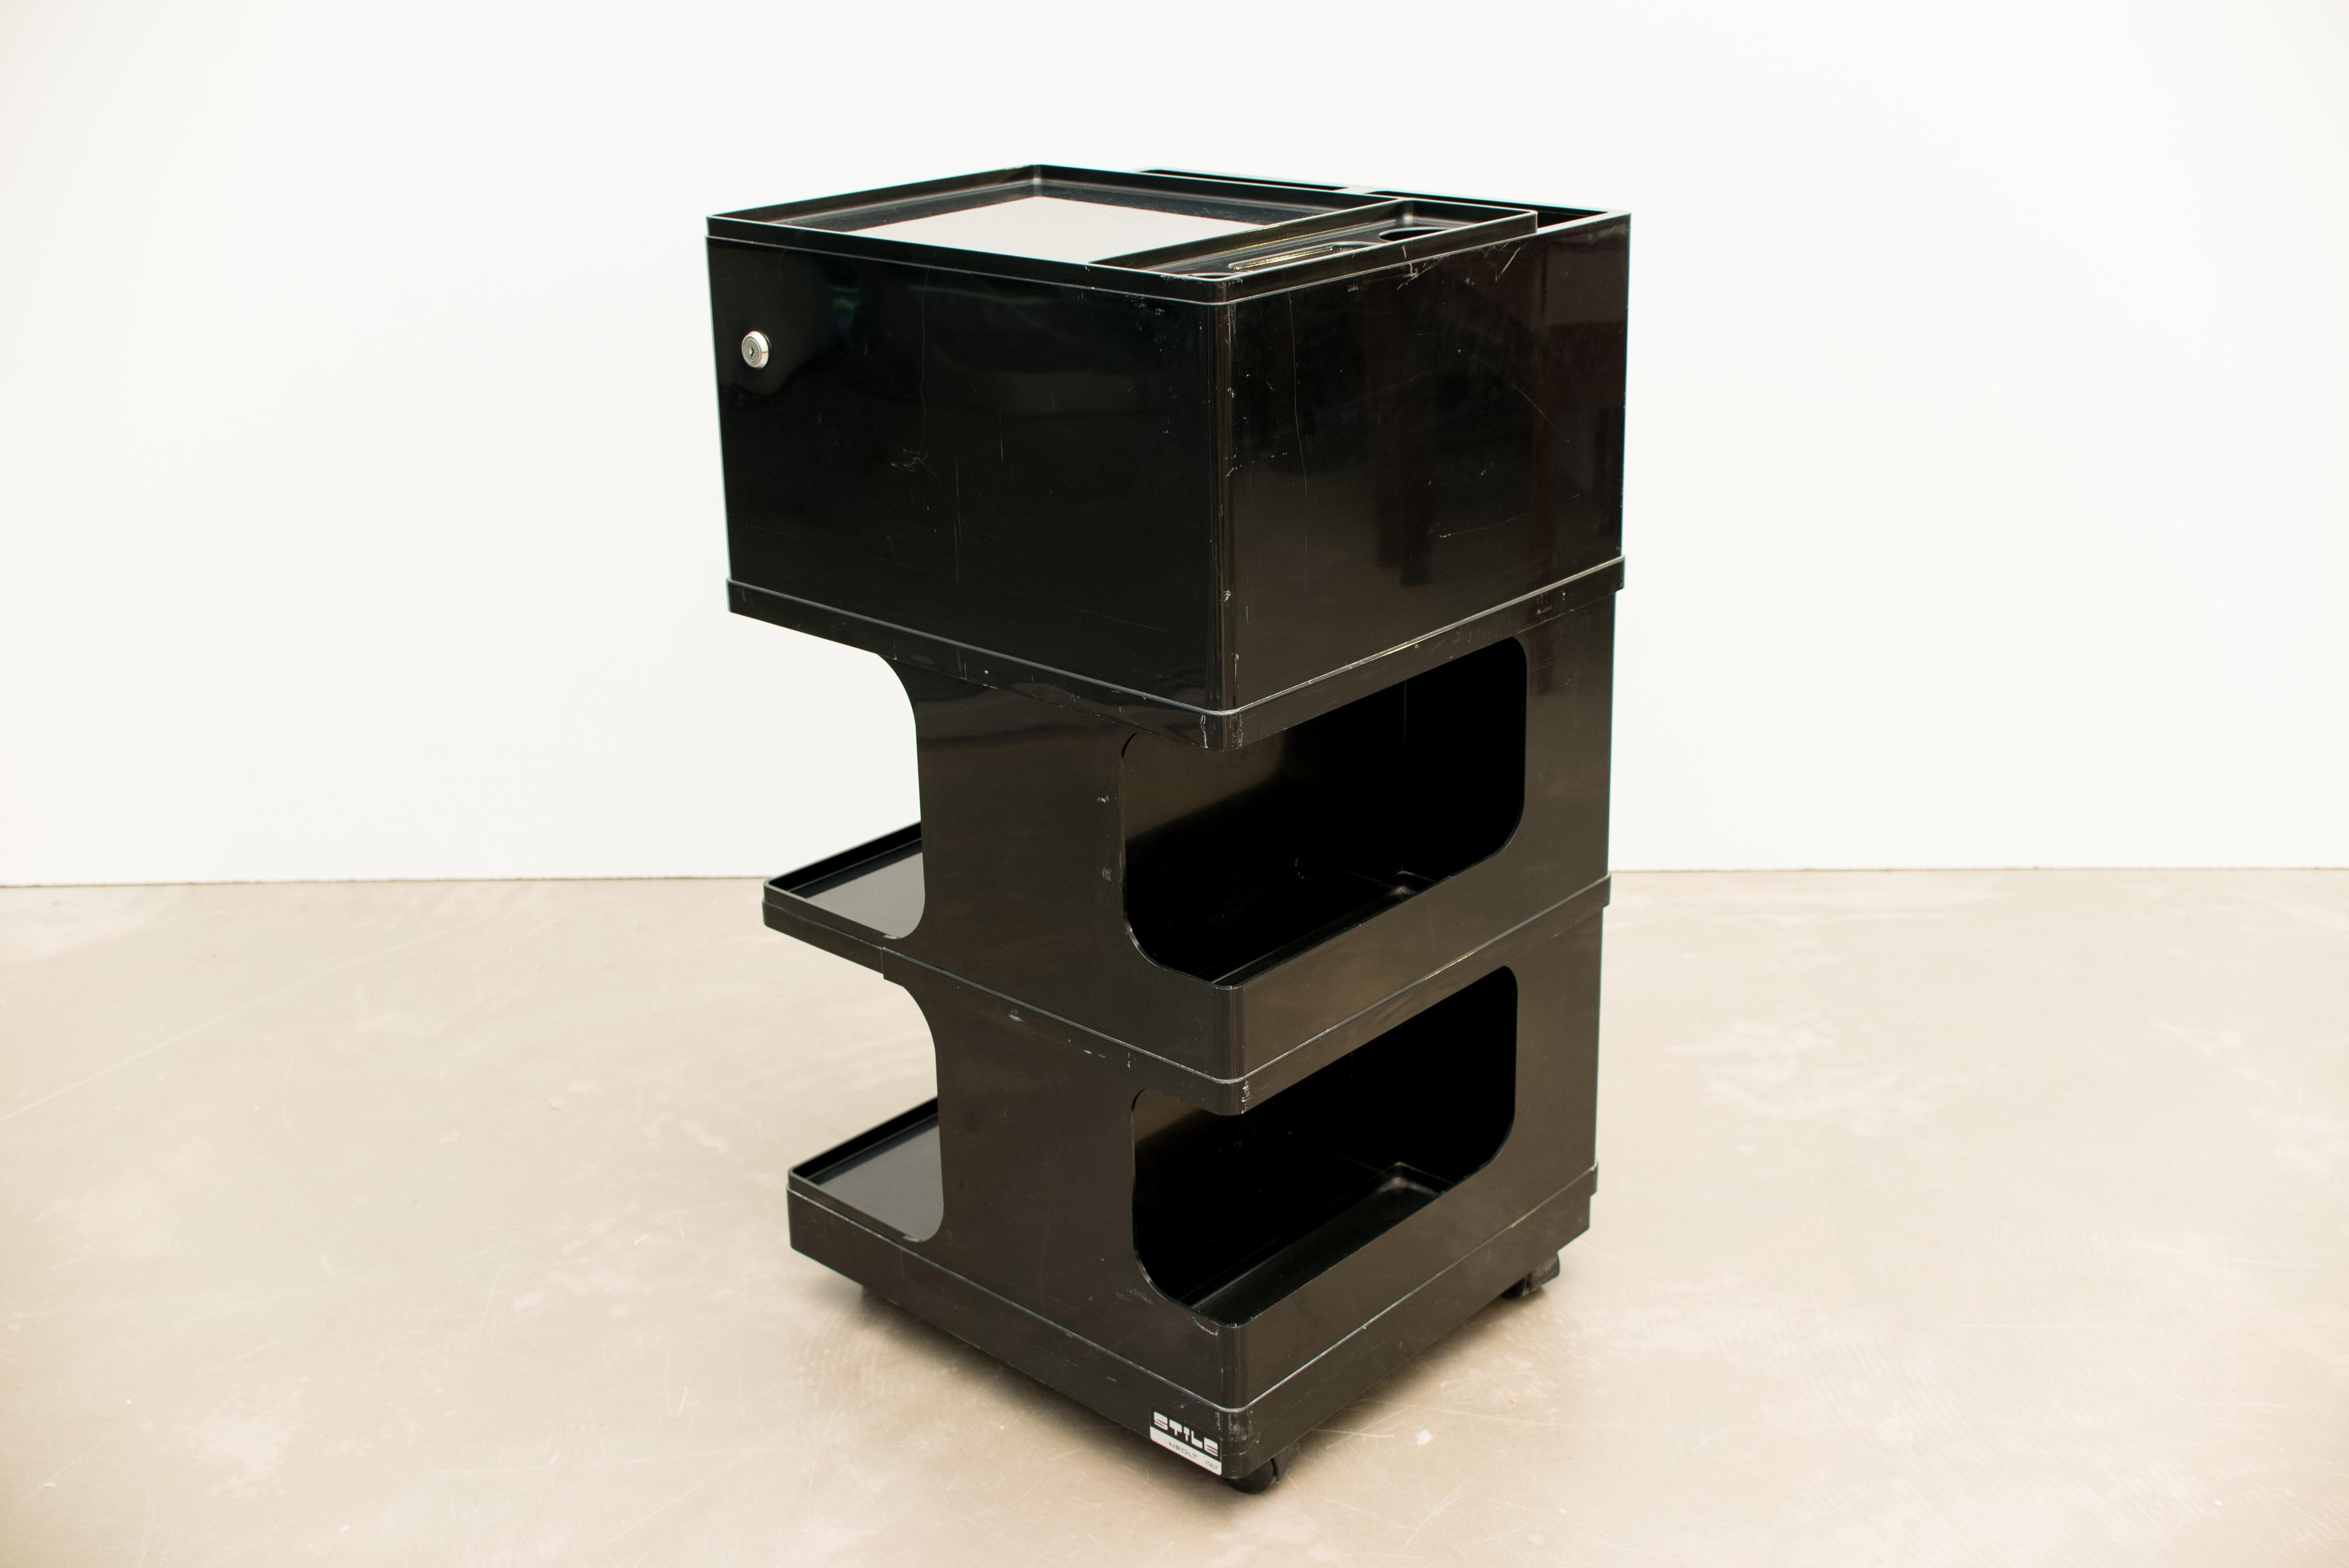 Vintage Italian work trolley was designed by Giovanni Pelis for Stile Neolt in Italy. It is made of black ABS plastic.